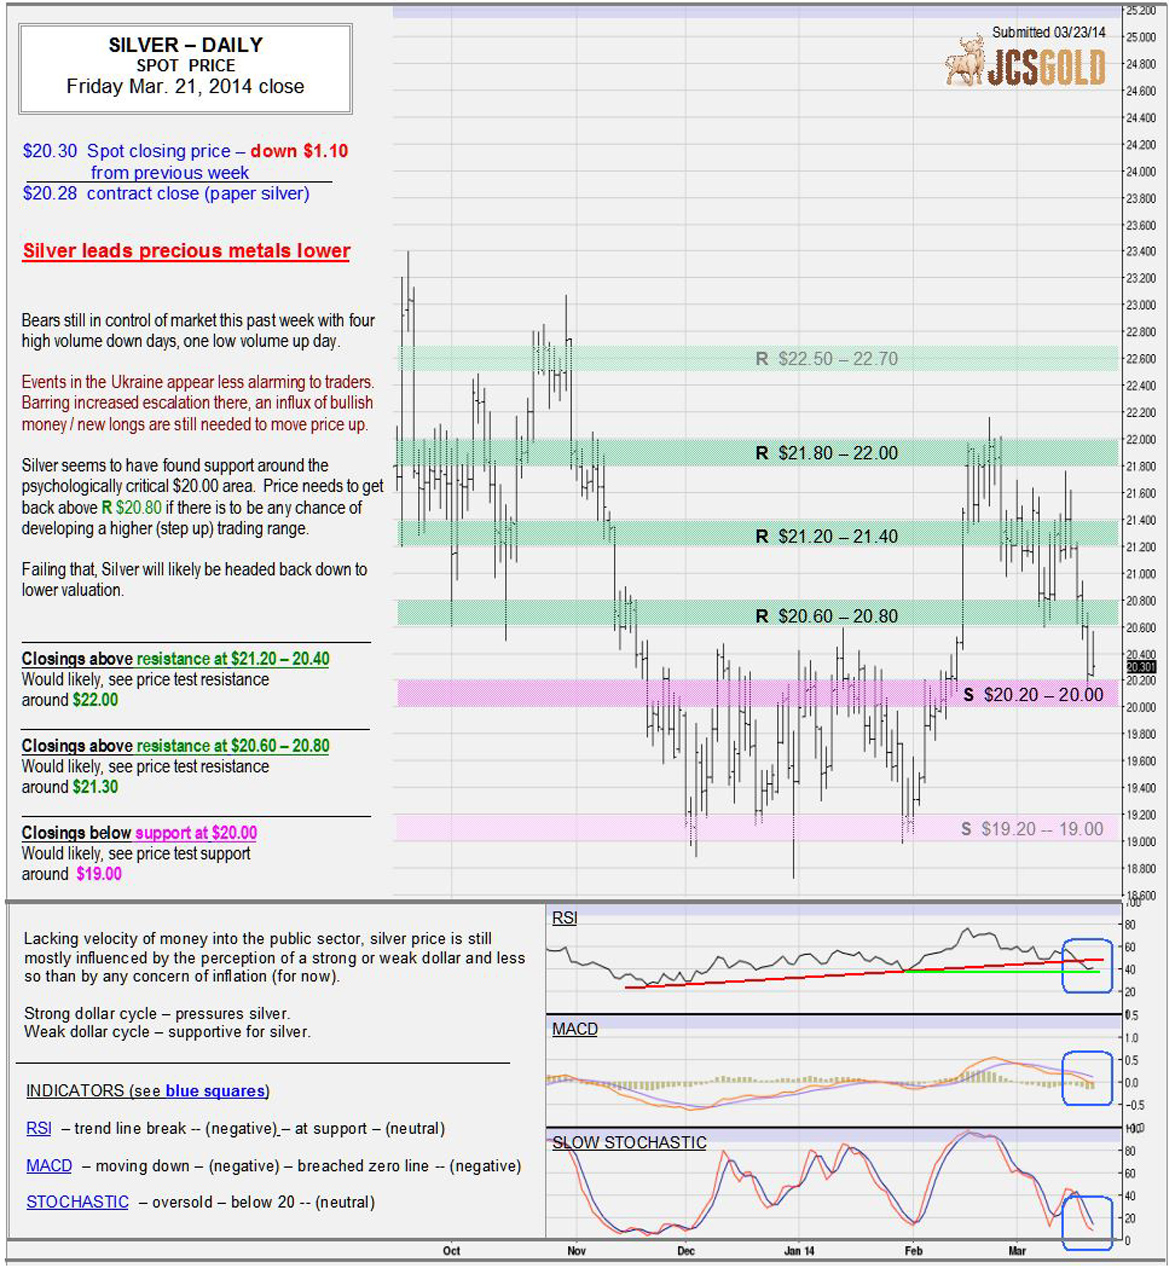 Mar 21, 2014 chart & commentary